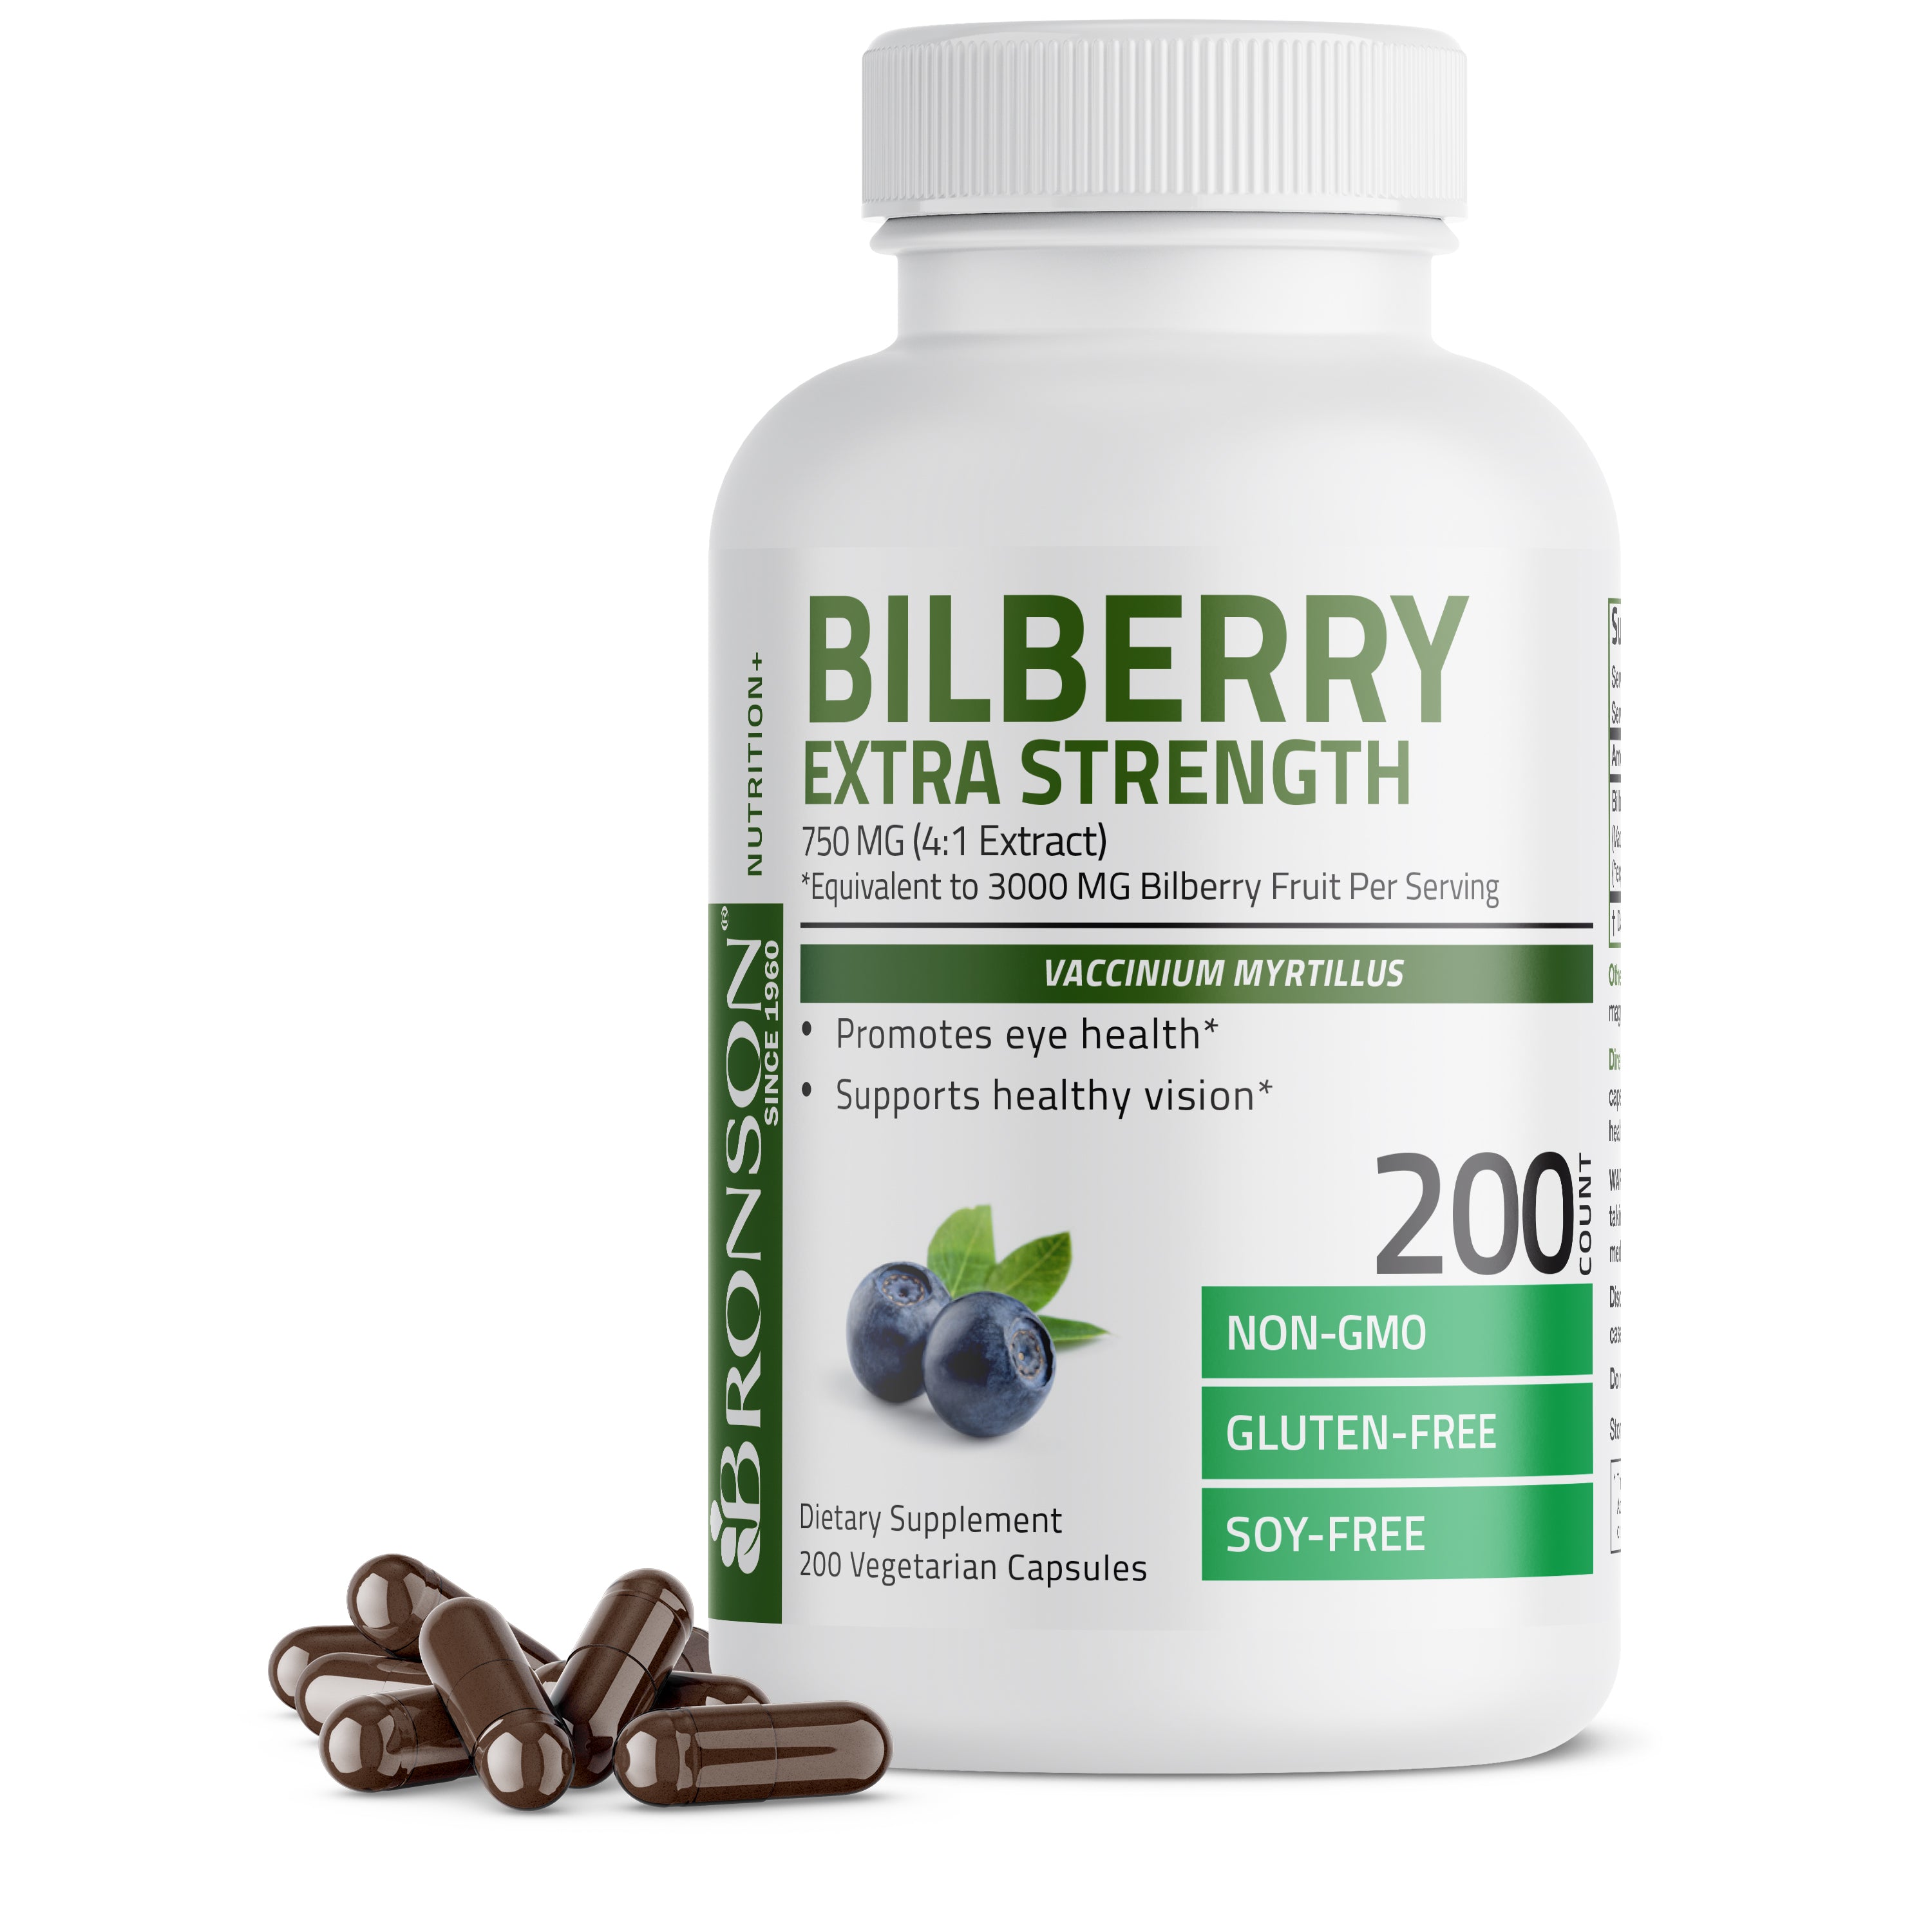 Bilberry Extra Strength 3000 mg, 200 Vegetarian Capsules view 1 of 7